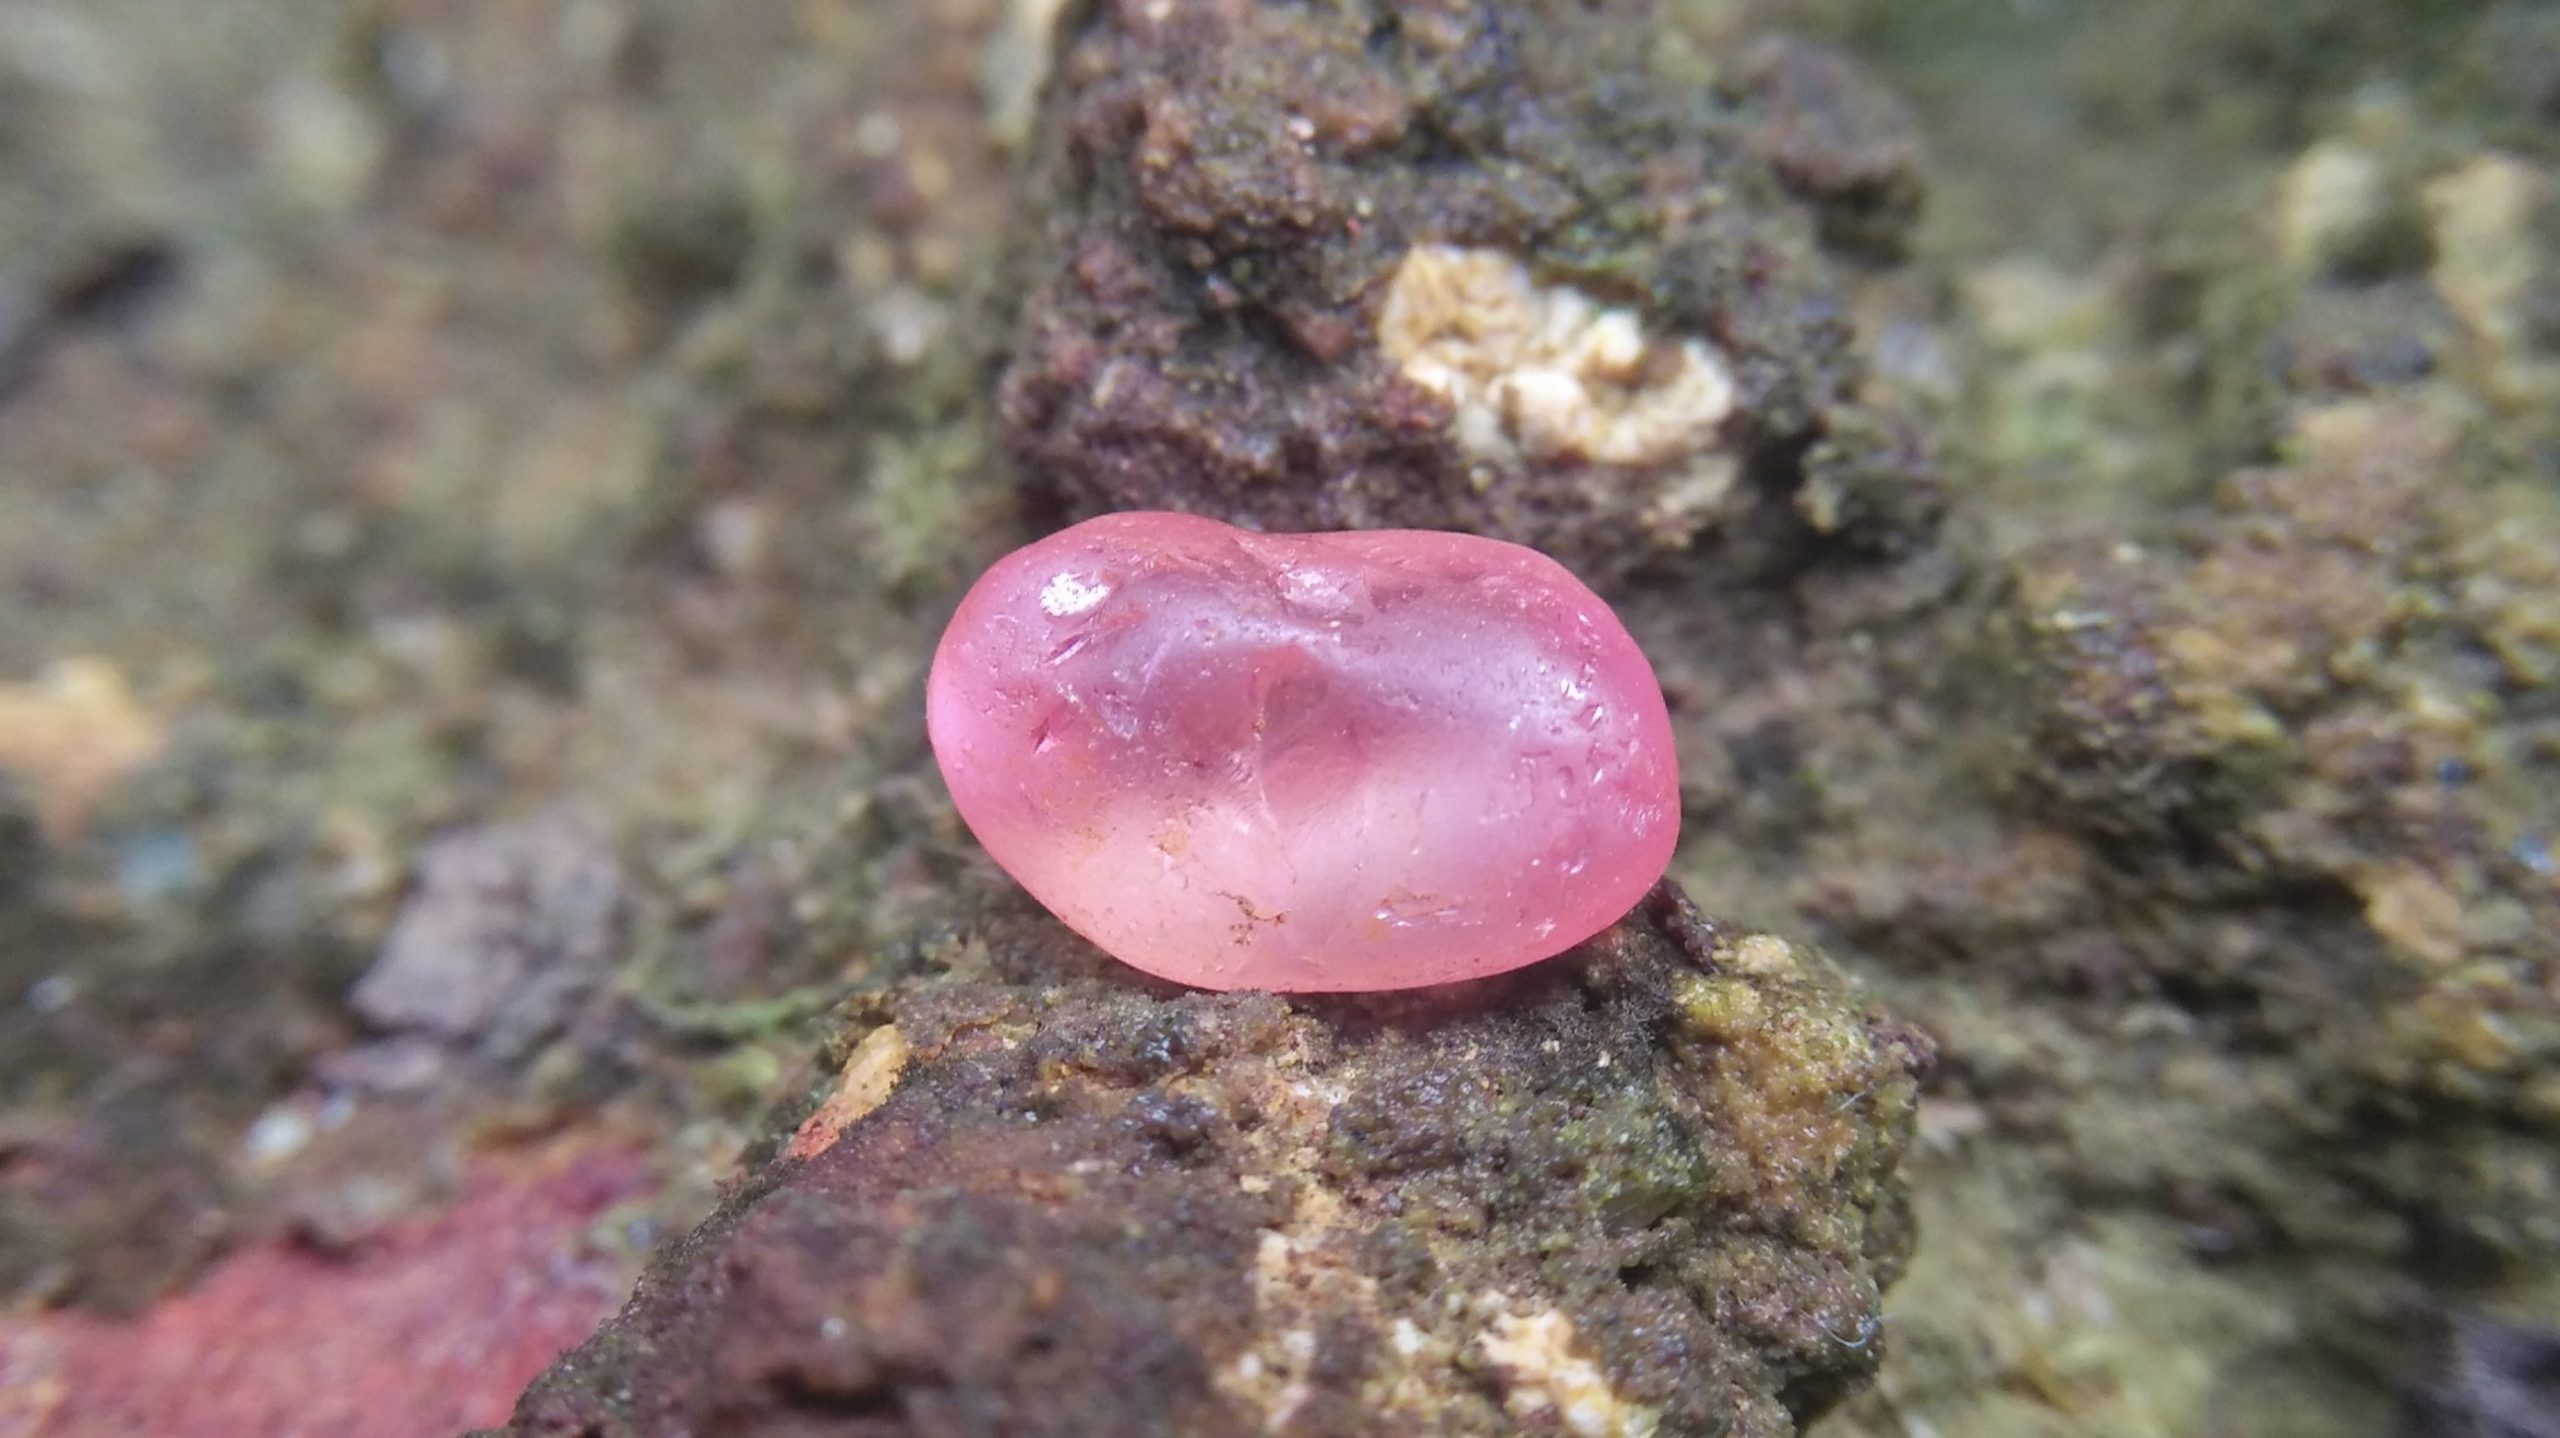 CEYLON 👑 King Sapphire This padparadscha sapphire rough stone unearthed from Rakwana Mineral, Ratnapura, Sri Lanka yesterday. Padparadscha sapphire is a special variety of gem corundum, featuring a delicate color that is a mixture of pink and orange ‘ a marriage between ruby and yellow sapphire The name padparadscha derives from the Sinhalies word ( පද්මරාග ) padmaraga,meaning lotus blossom, as the stone is of a similar color to the lotus blossom You will often hear that the rarest and most expensive sapphire is the pink-orange padparadscha from Sri Lanka.